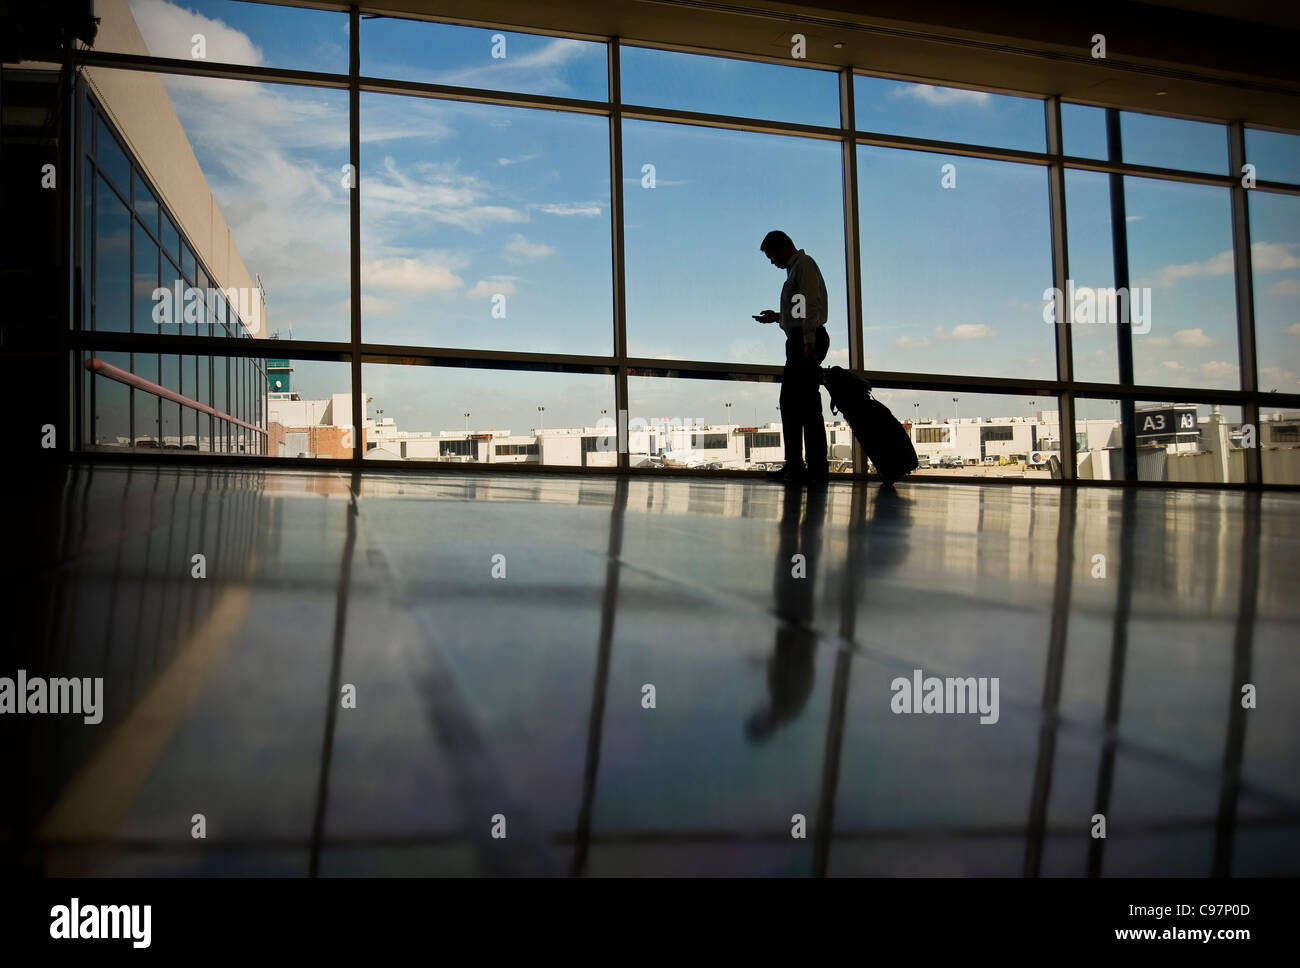 Traveling Business Man Checking Email On Mobile Cell Phone In Airport, Philadelphia USA Stock Photo